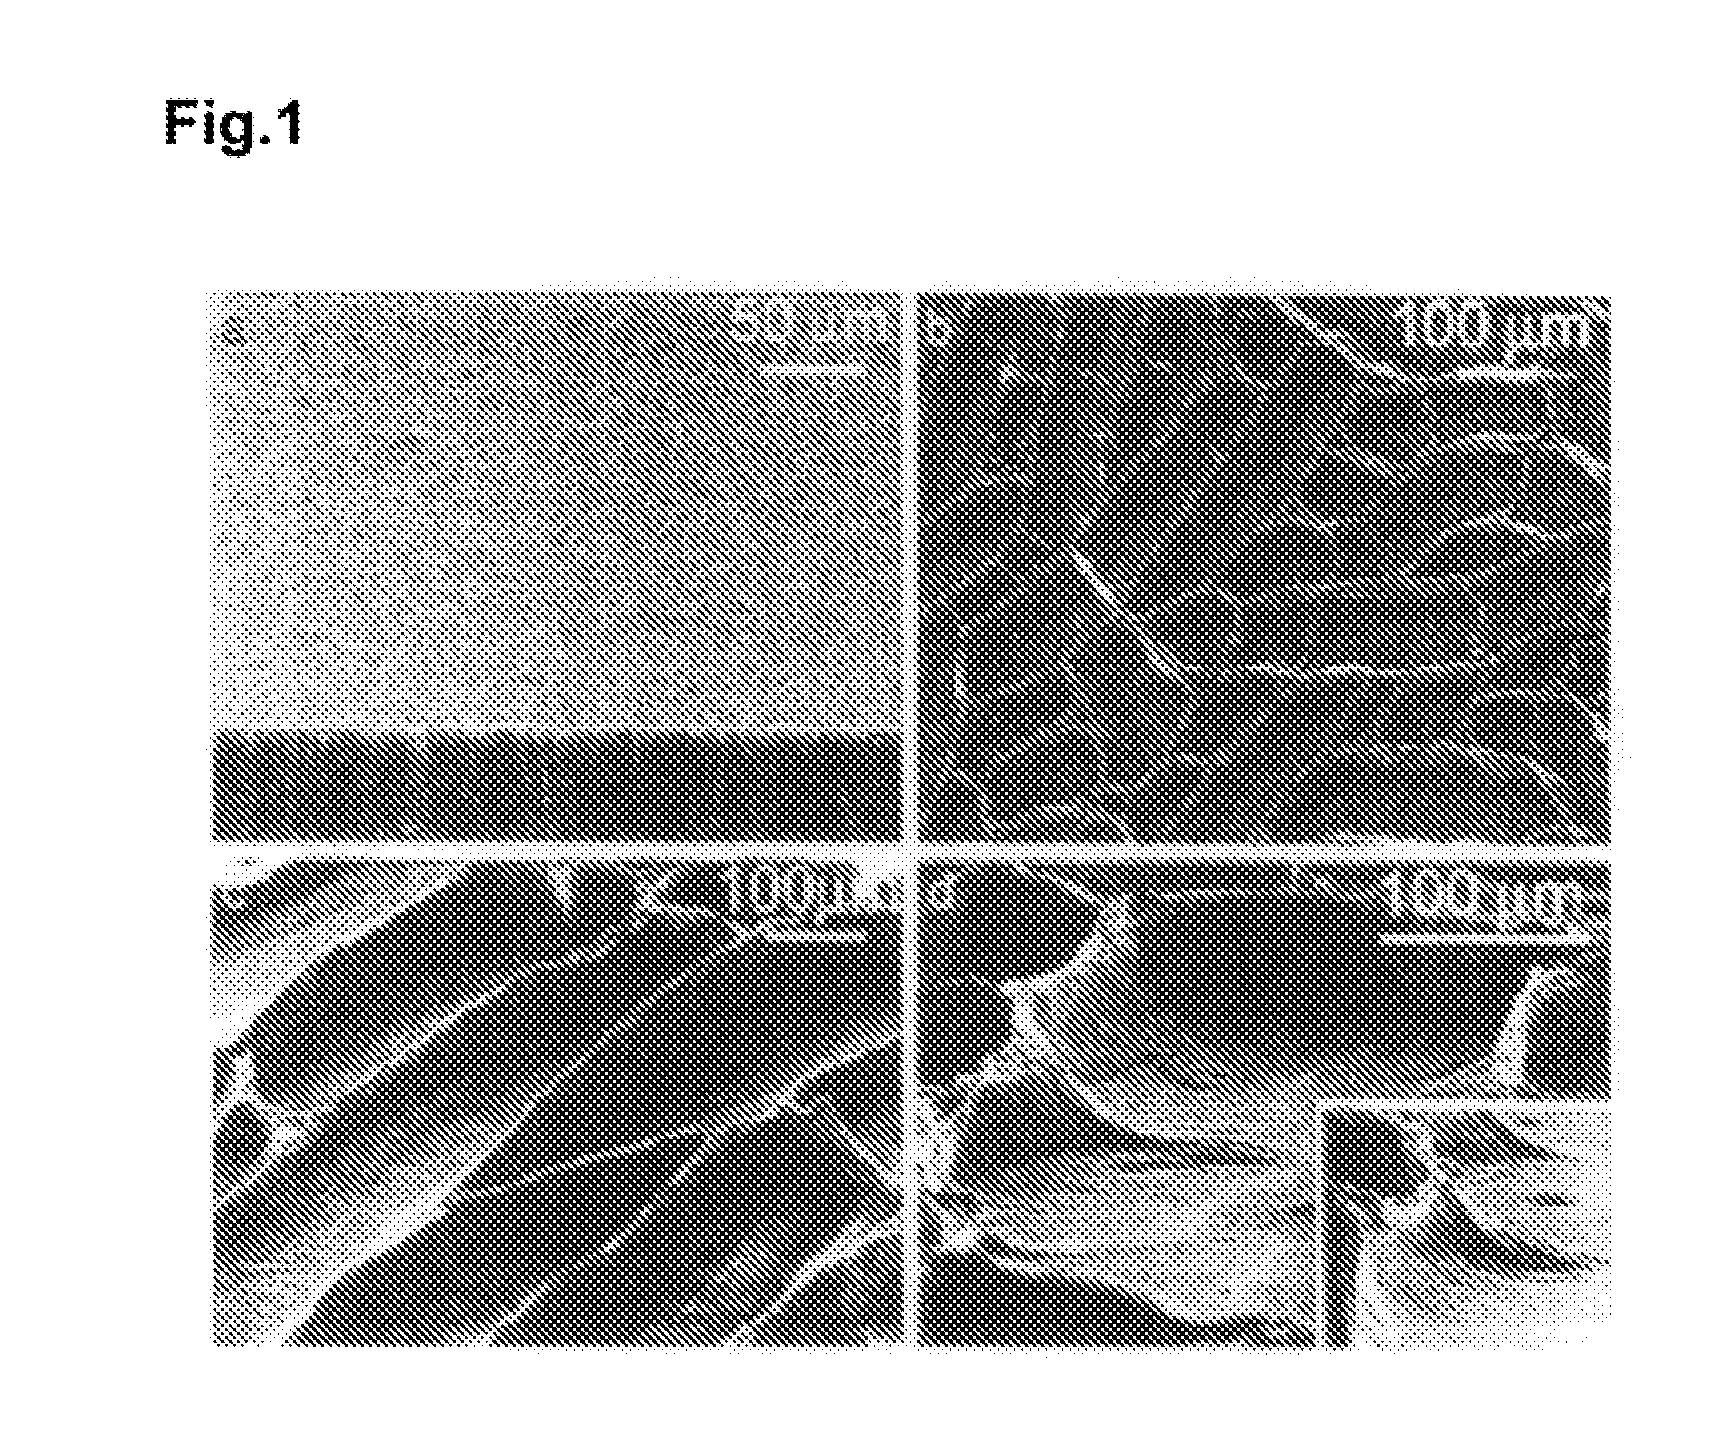 Carbon nanotube film structure and method for manufacturing the same